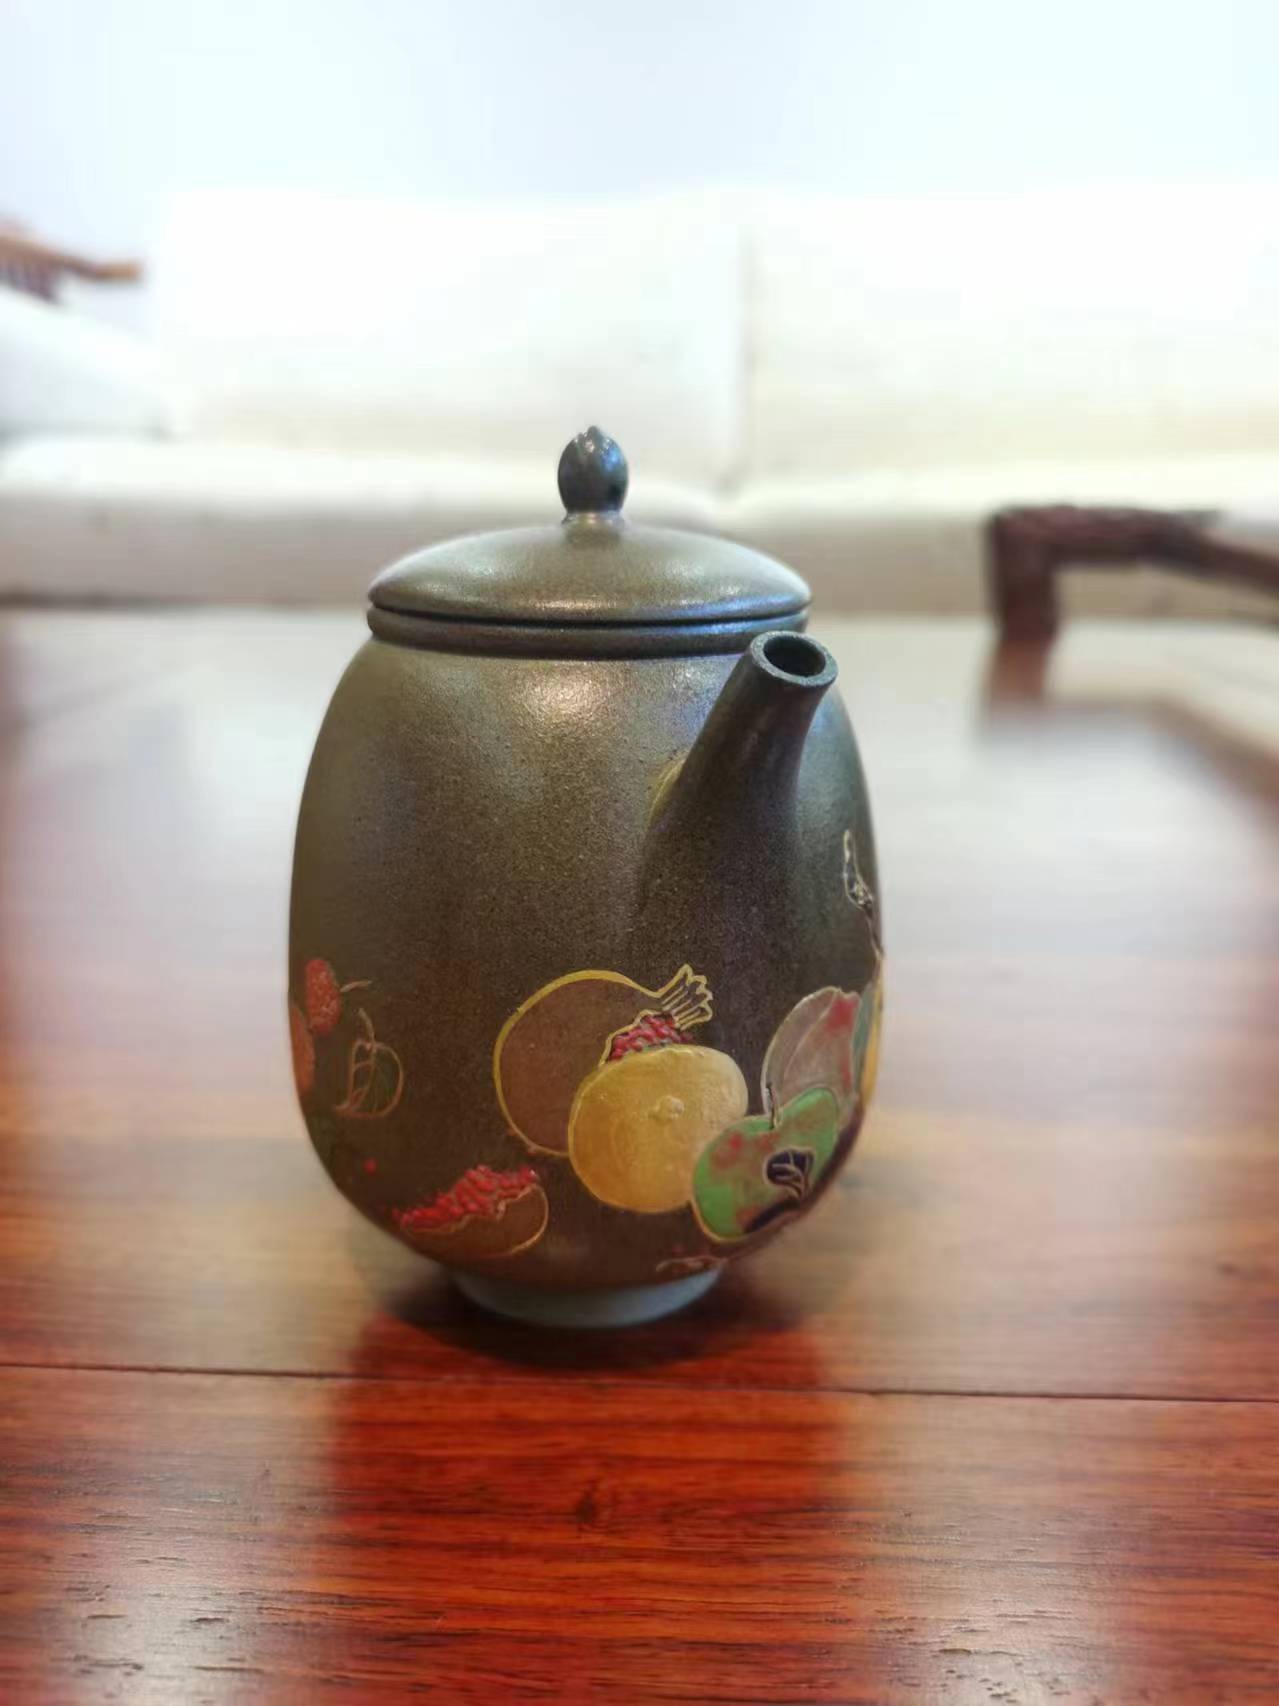 Siyutao Yixing Teapot ,Good harvest丰收,wood fired in dragon kiln ,180ml,full handmade,Authentic Yixing Ben shan Lv Ni from Huang long mine 4 &aged 35 years,Gu Fa Lian ni (Most Archaic Clay Forming),（only one piece） - SiYuTao Teapot